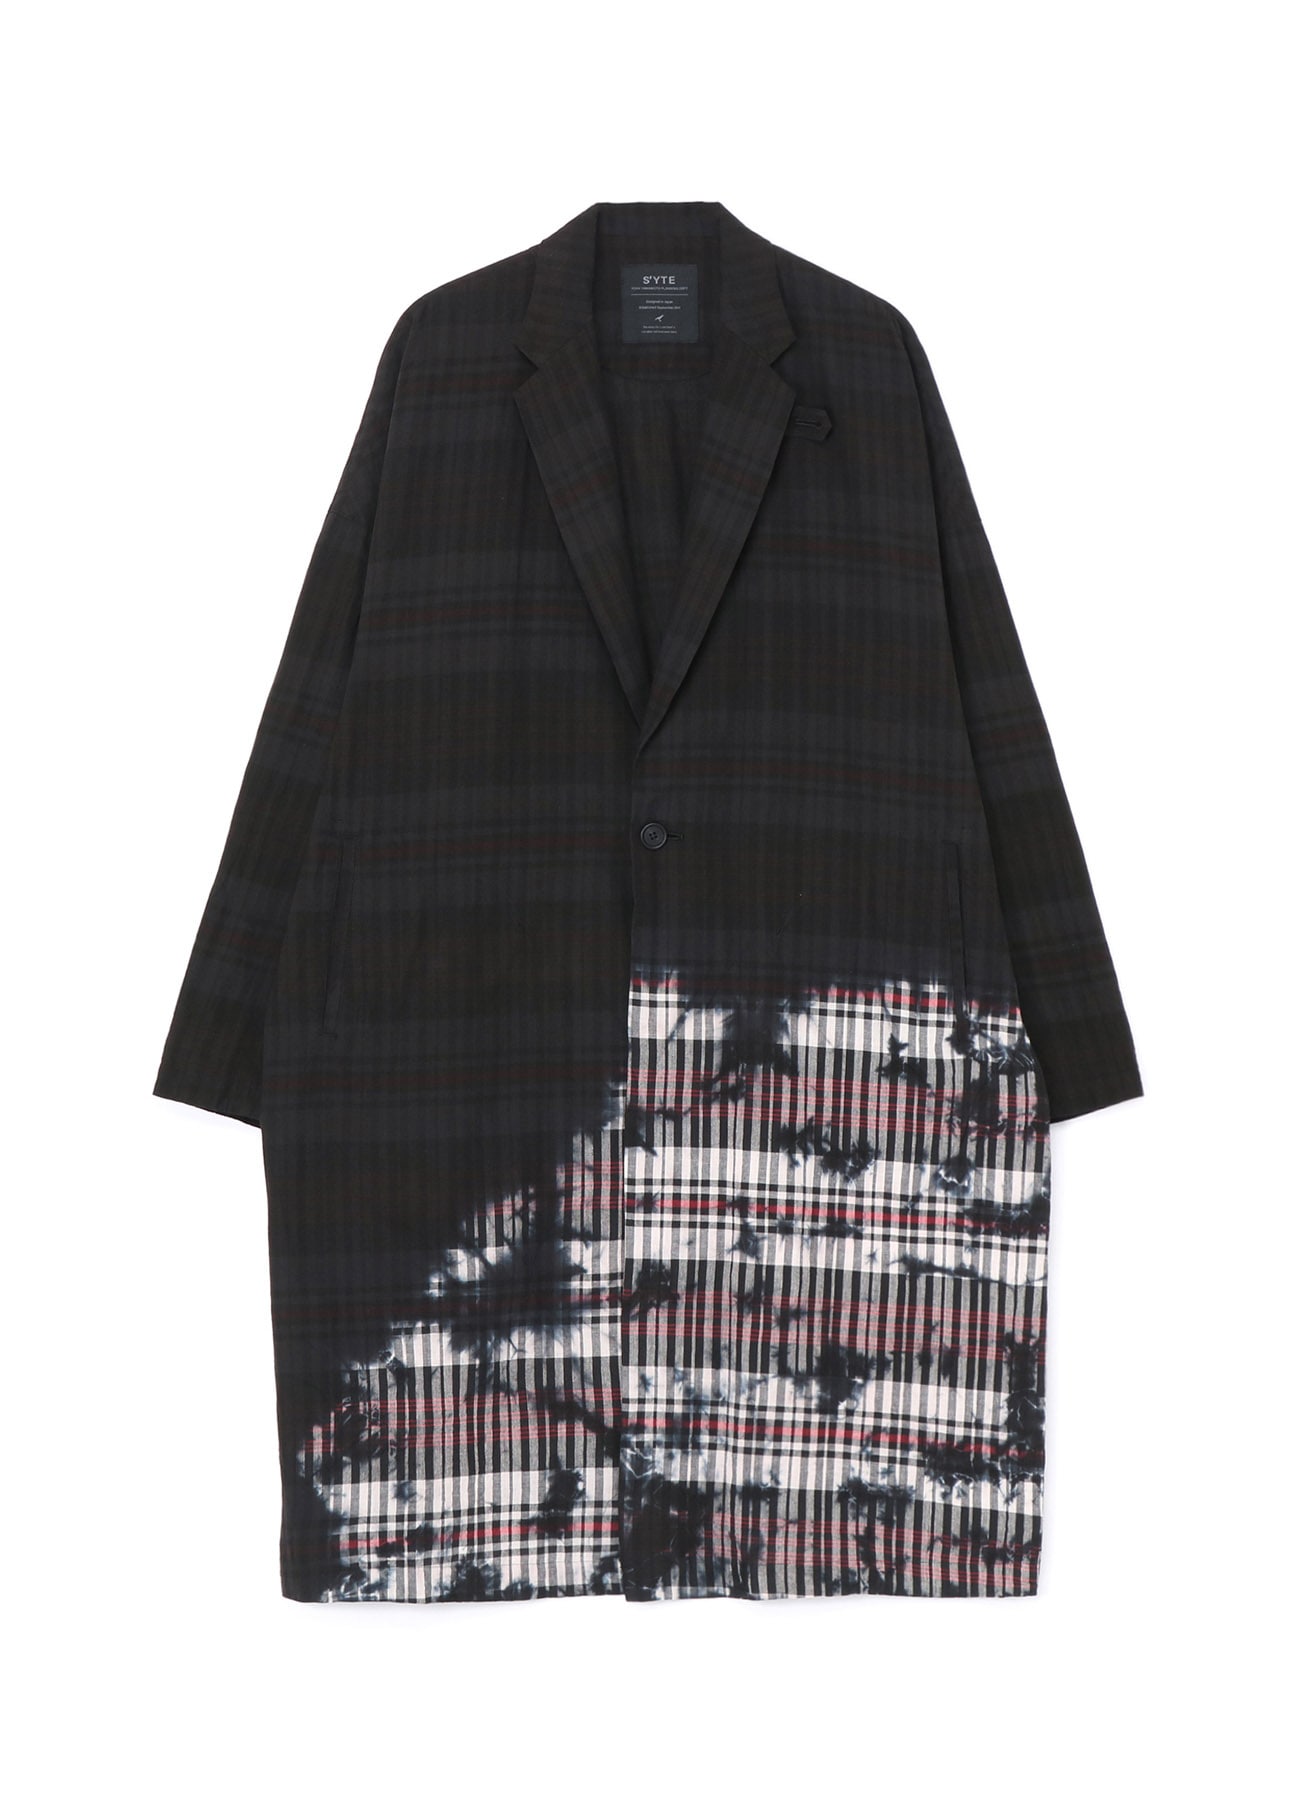 UNEVENLY DYED BLACK & WHITE MADRAS CHECK LONG JACKET